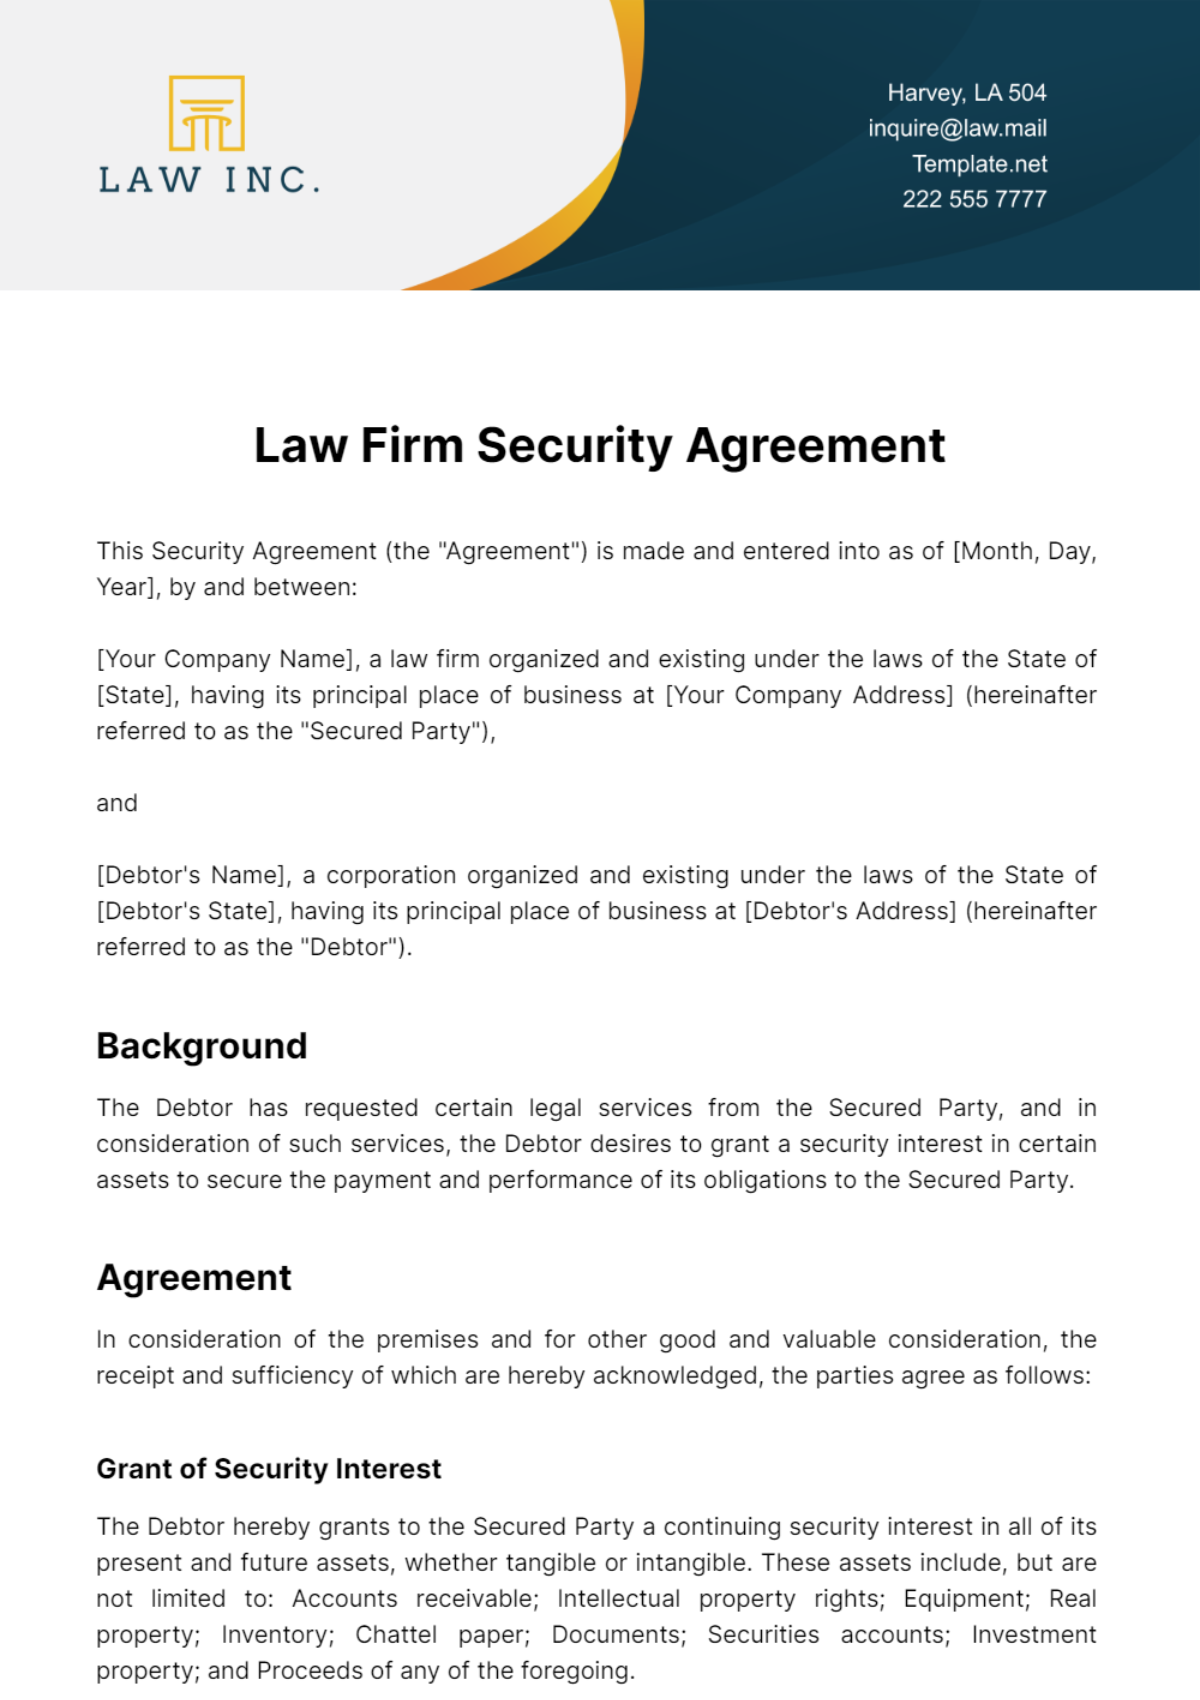 Law Firm Security Agreement Template